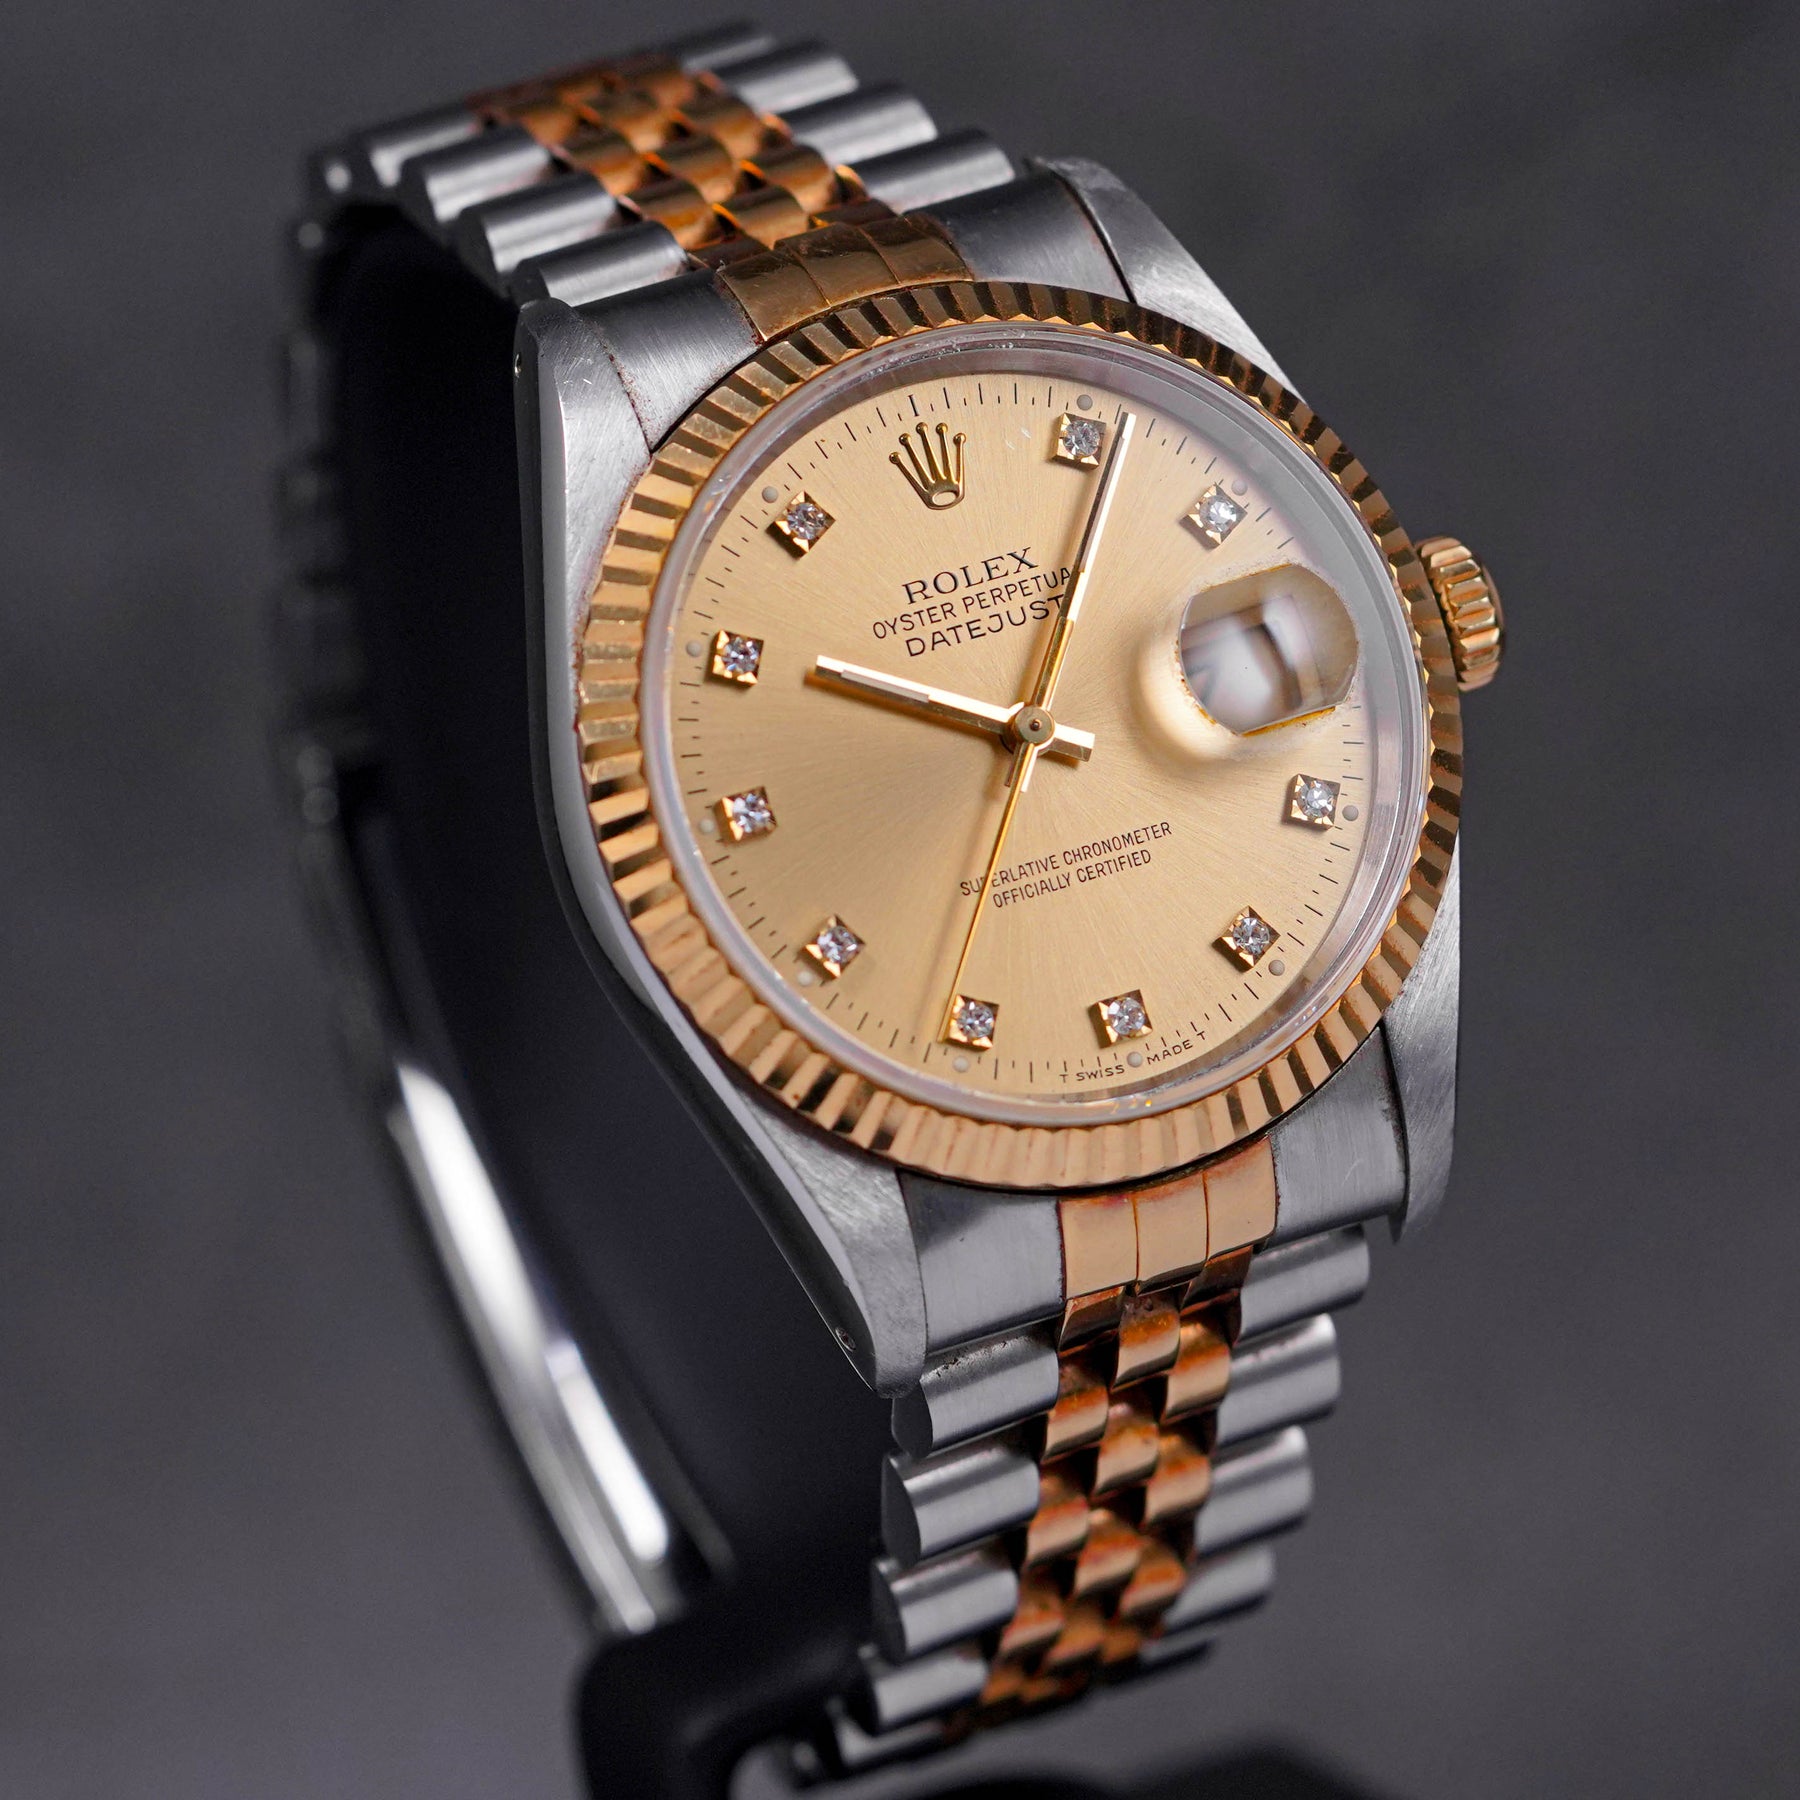 DATEJUST 36MM 16233 TWOTONE YELLOWGOLD CHAMPAGNE DIAMOND DIAL 'E SERIES' (WATCH ONLY)